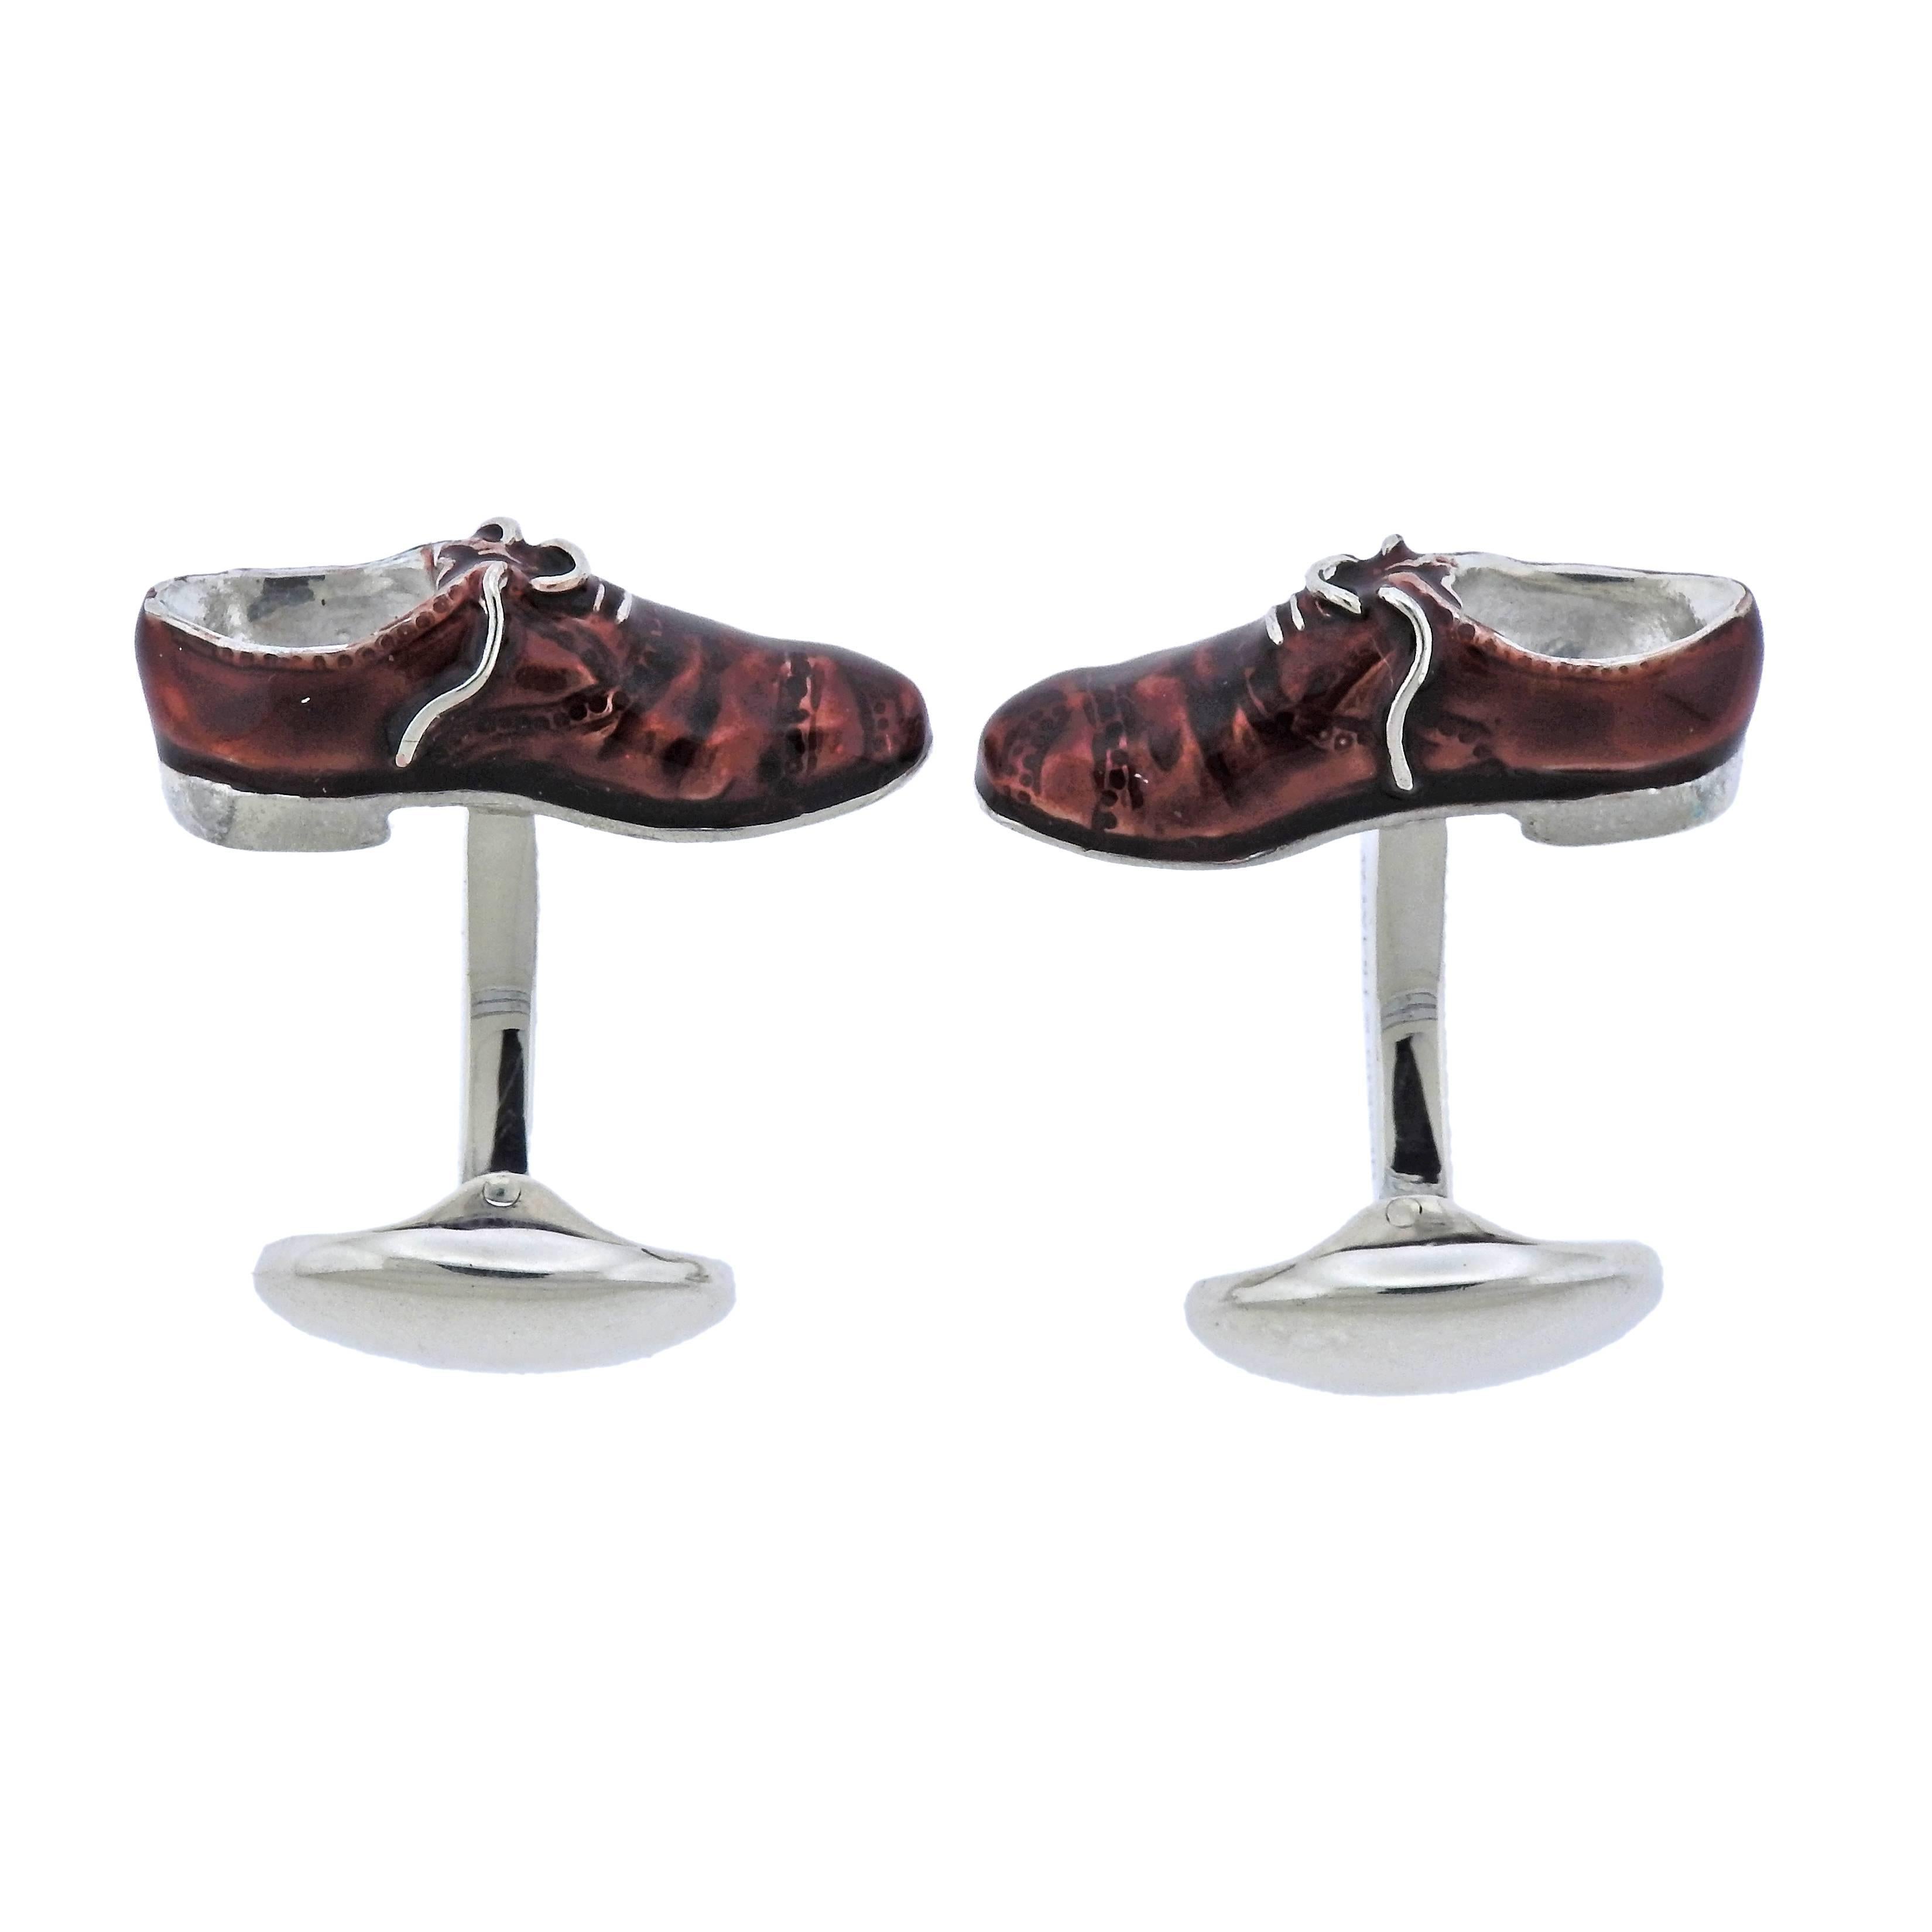  Brand new pair of sterling silver  enamel cufflinks, depicting brogue shoes. crafted by Deakin & Francis.
Come with box and papers. Each shoe is 24mm x 8mm, weigh 23.2 grams. Marked: Deakin & Francis, D&F, 925, English marks.